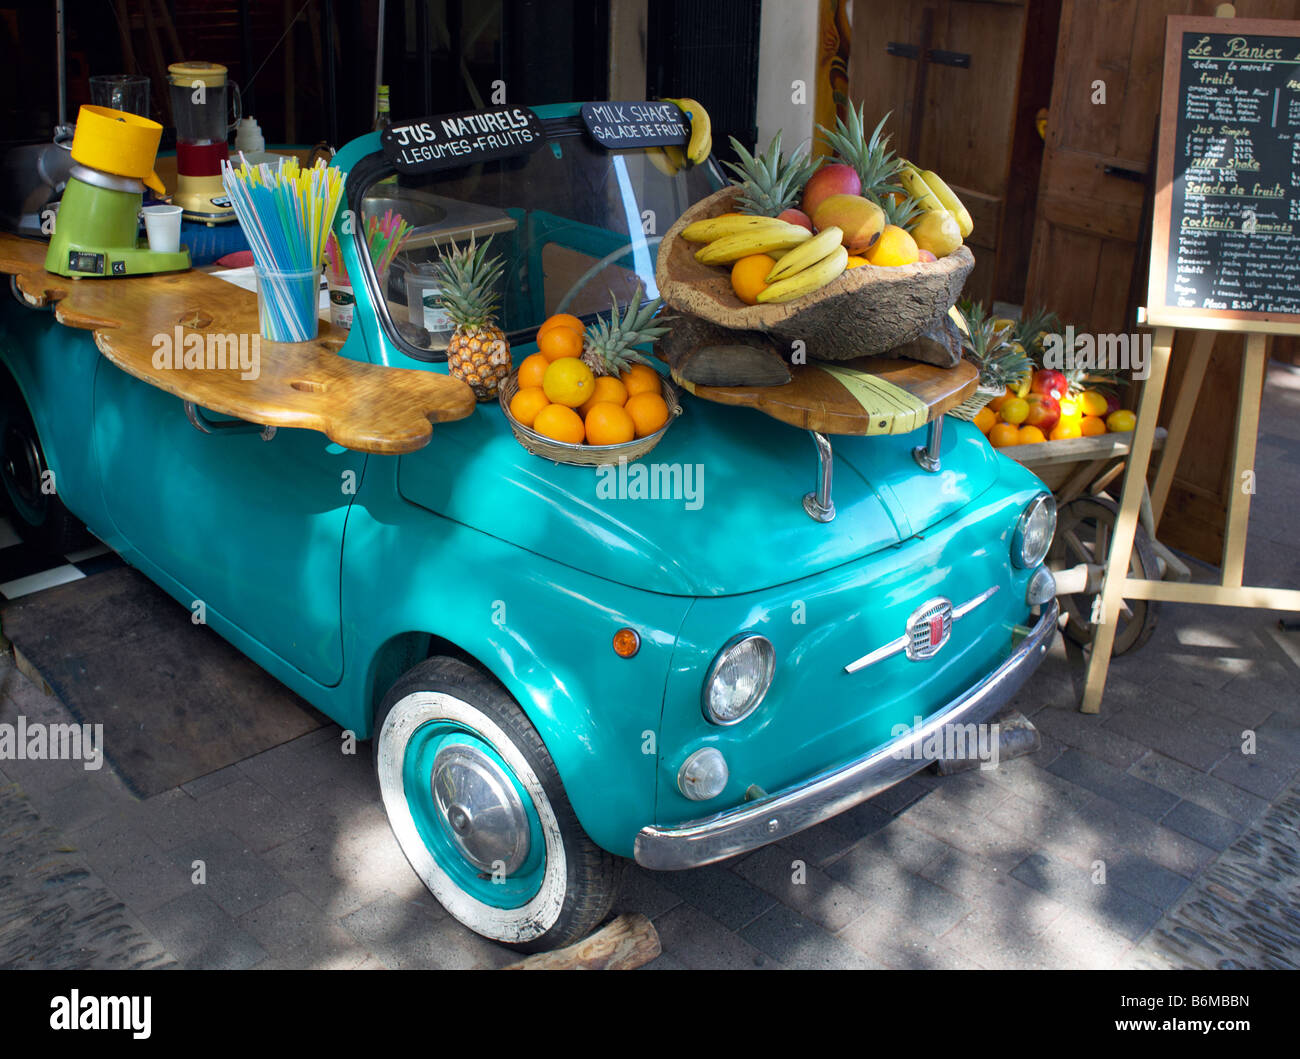 A converted Fiat car selling fruit juice in the resort of Collioure in France Stock Photo